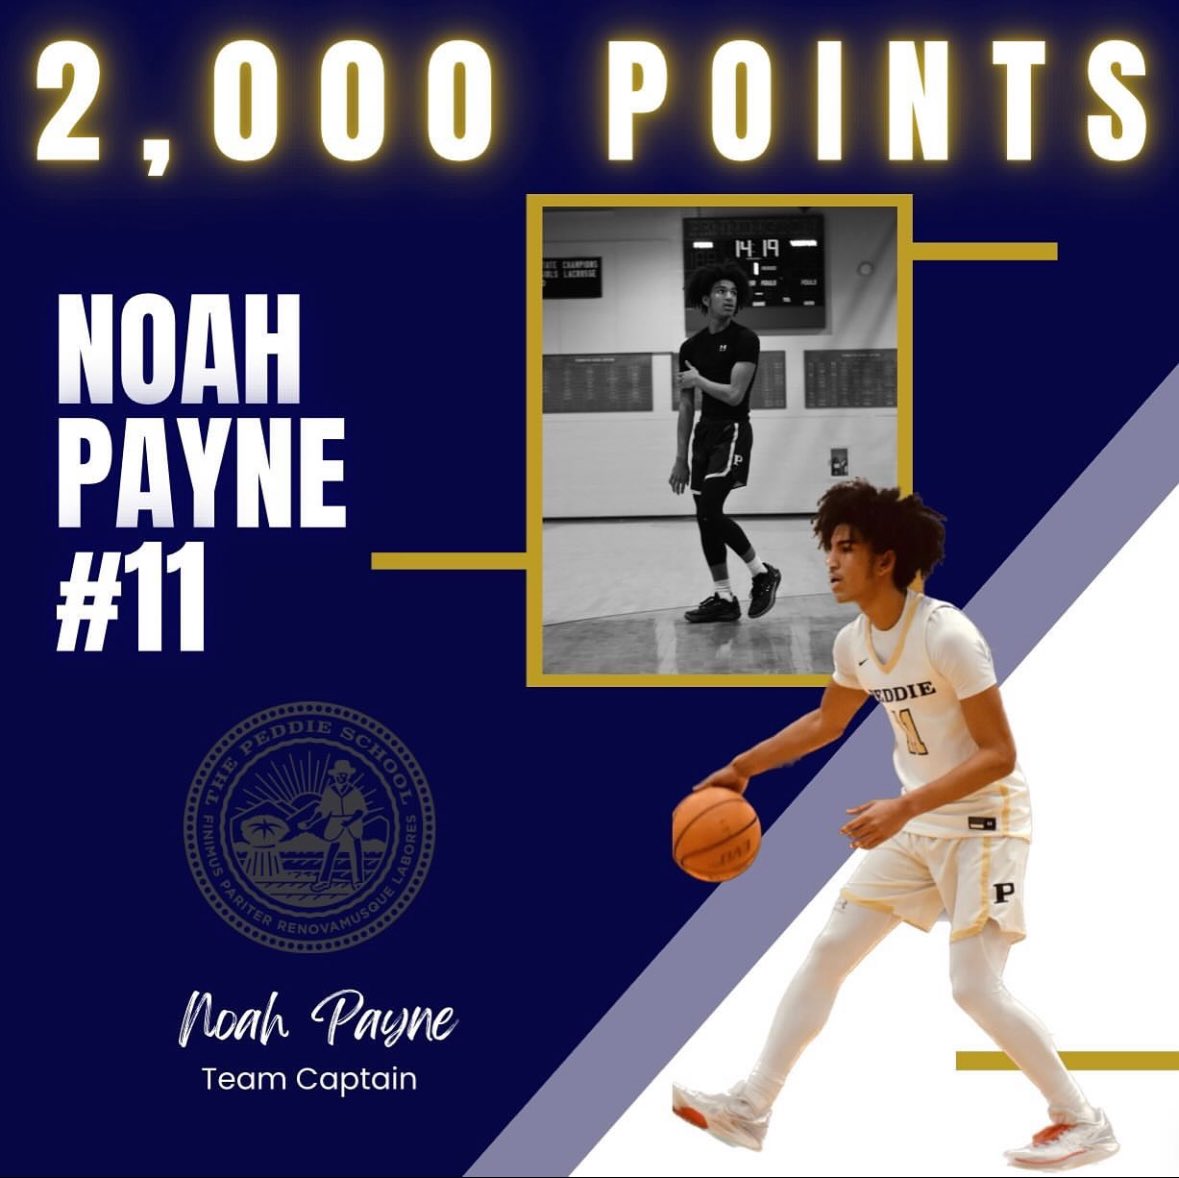 Finished off my high school career with 2049 points scored including my career high of 43 points in my last game. Thank you to everyone that helped me along my journey. Final Stats (27 games) - 26.1ppg 8apg 7.5rpg 4spg 49/35/80 splits Recruitment still open!